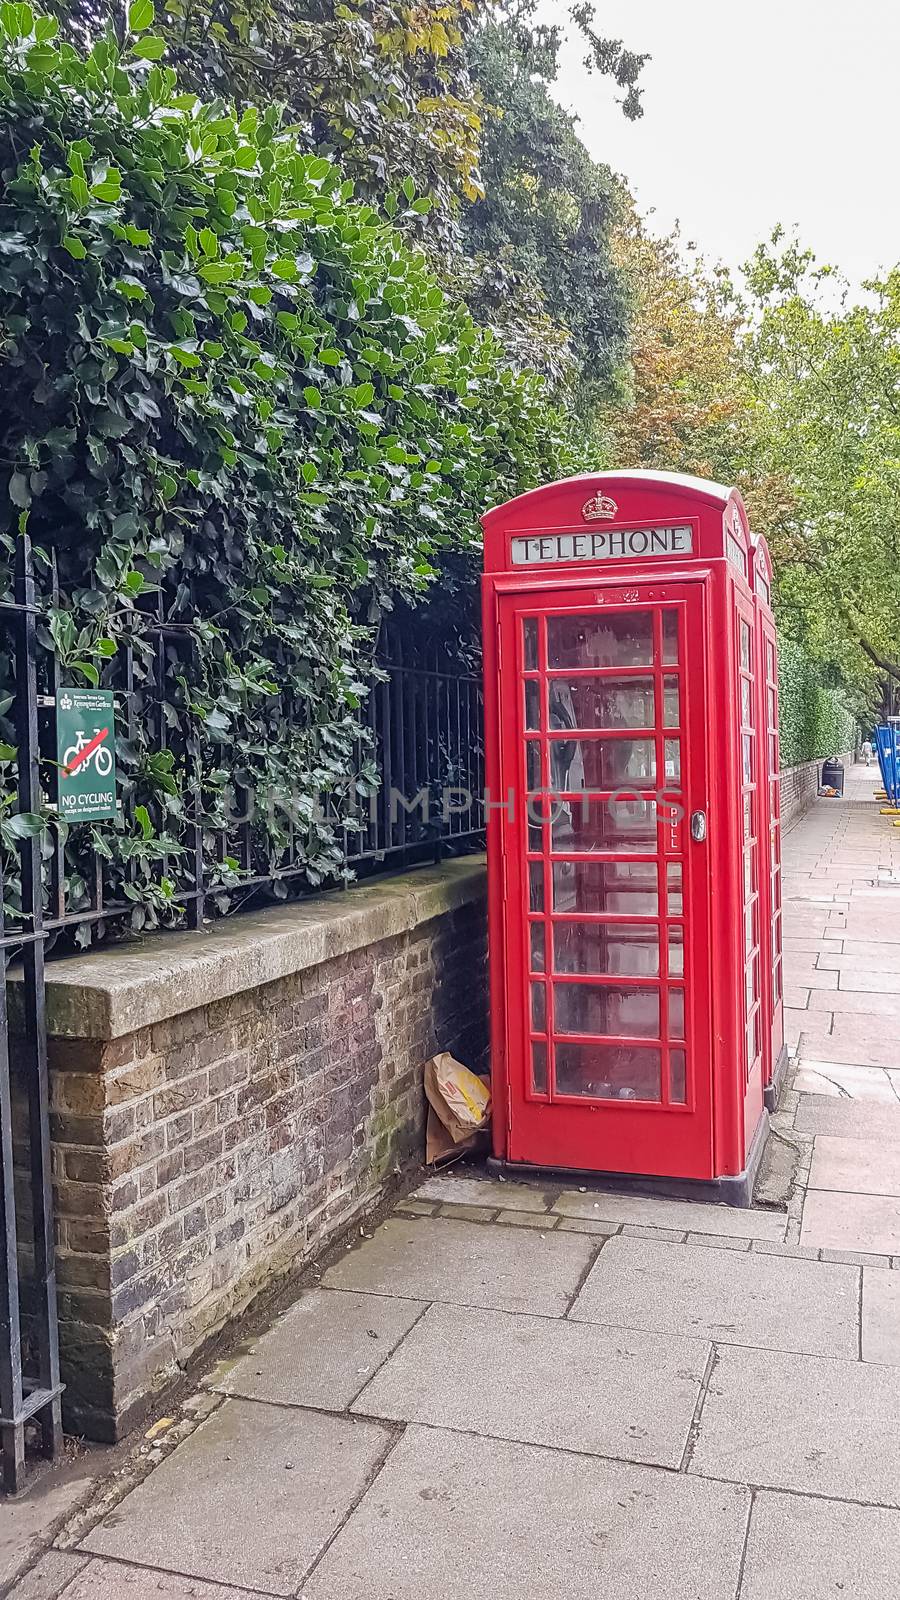 Classic red British telephone booth in central London